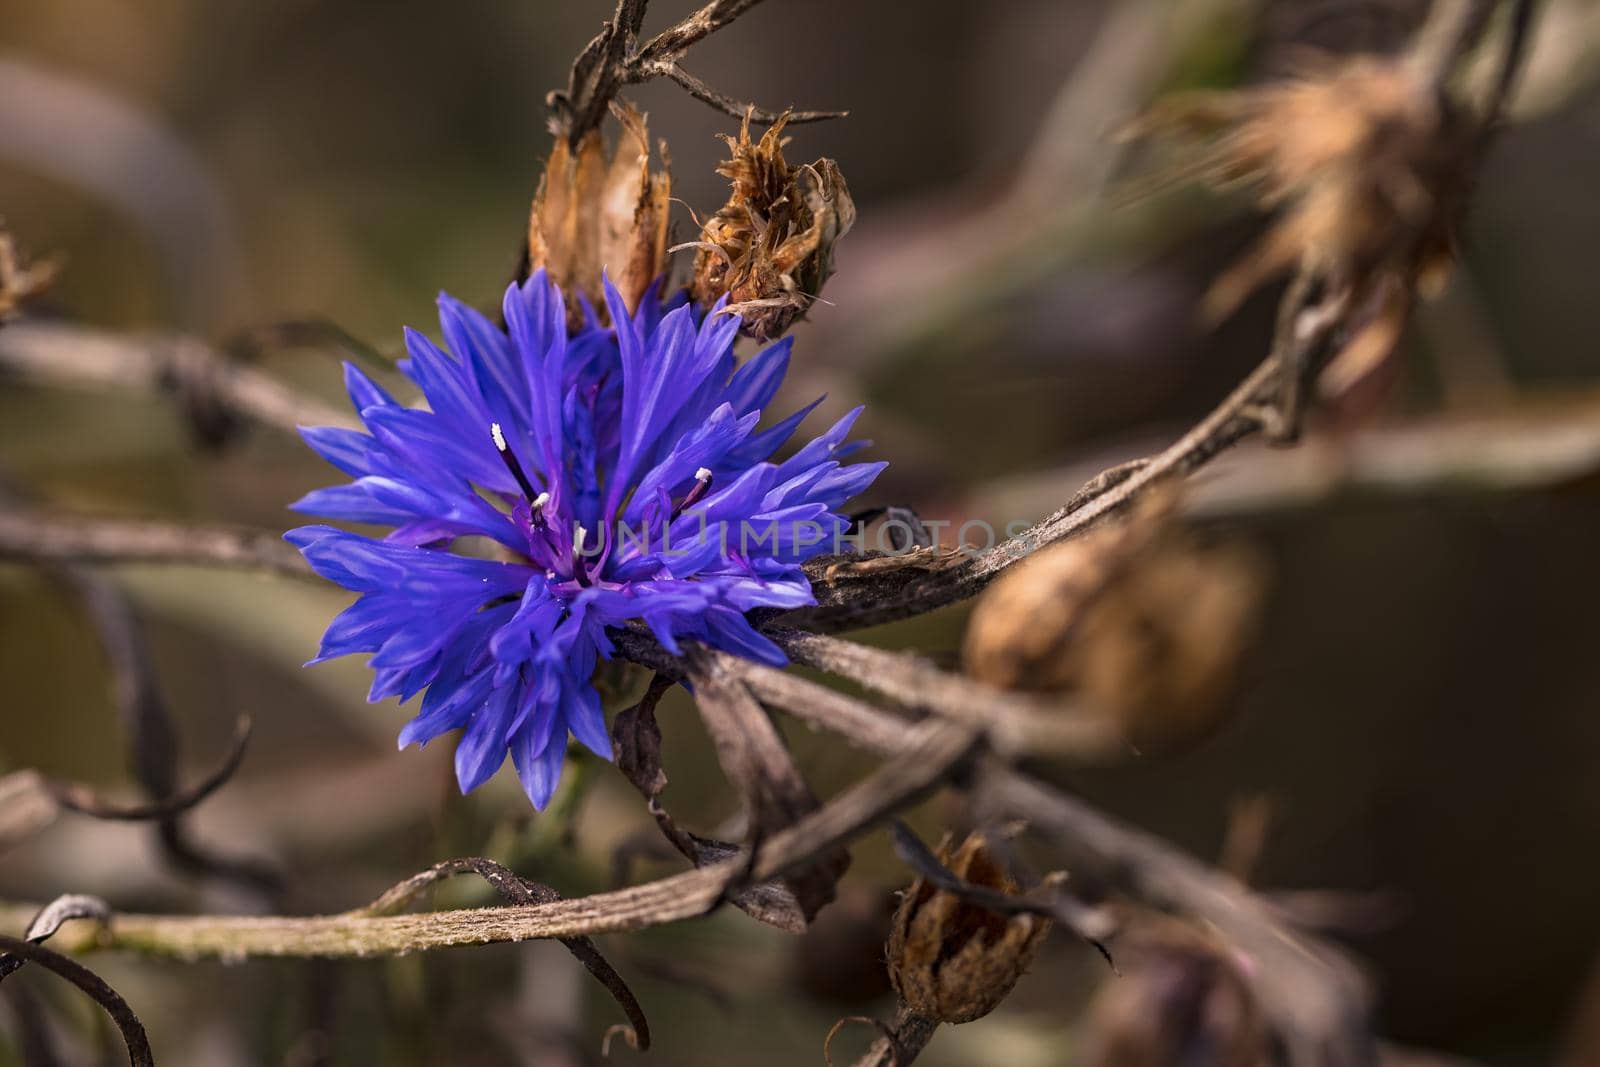 The striking blue flower of a cornflower isolated in front of brown withered leaves, garden in Germany